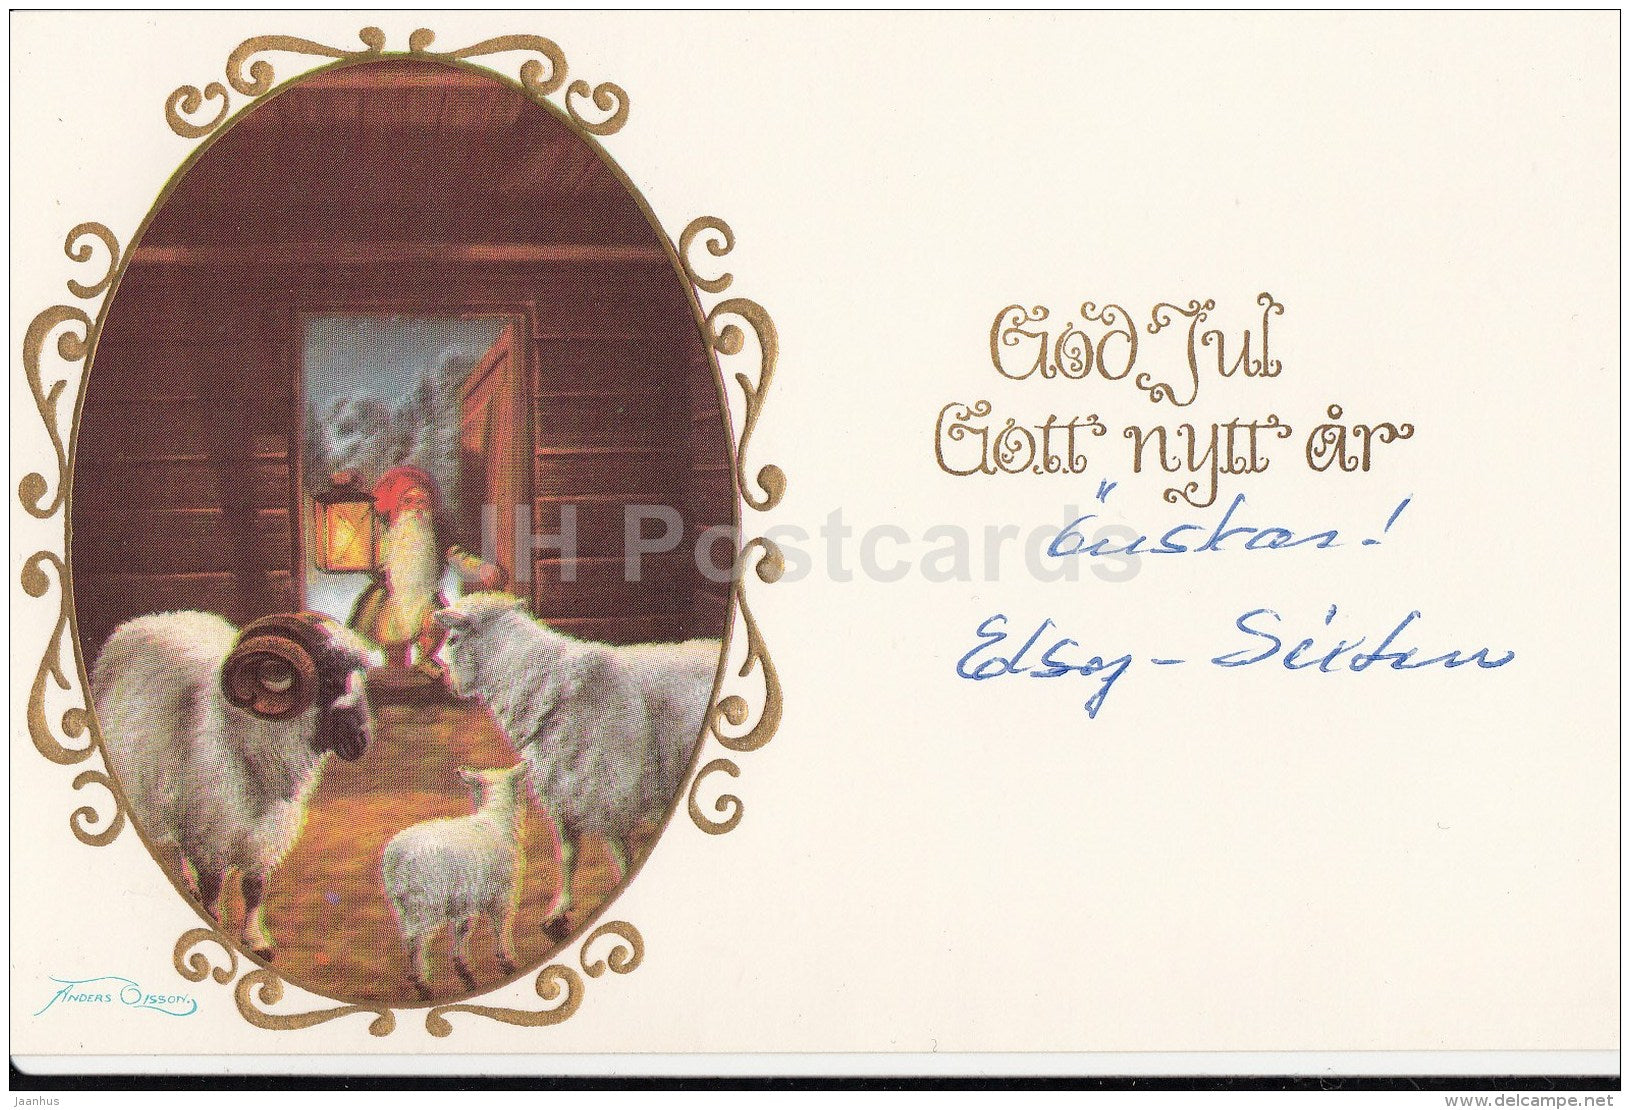 Christmas Greeting Card - sheep - gnome - Andreas Olsson - Sweden - used - JH Postcards